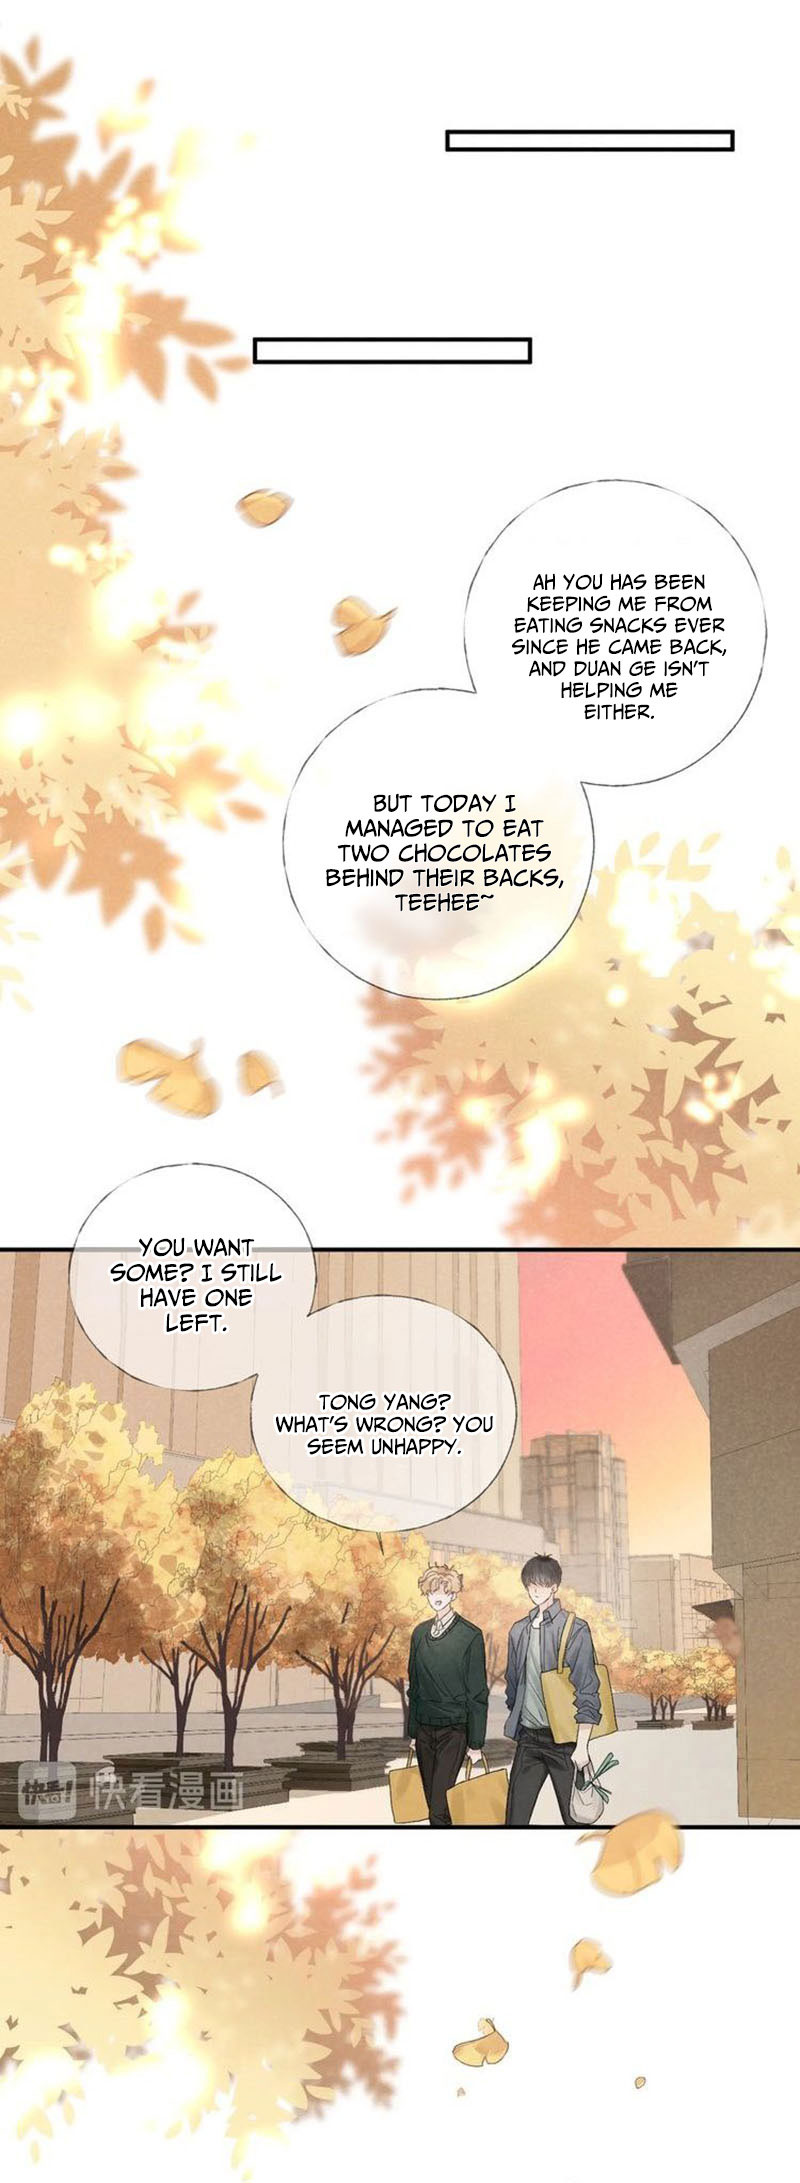 Indulged In Your Light Ch. 17 Waiting Under the Falling Leaves